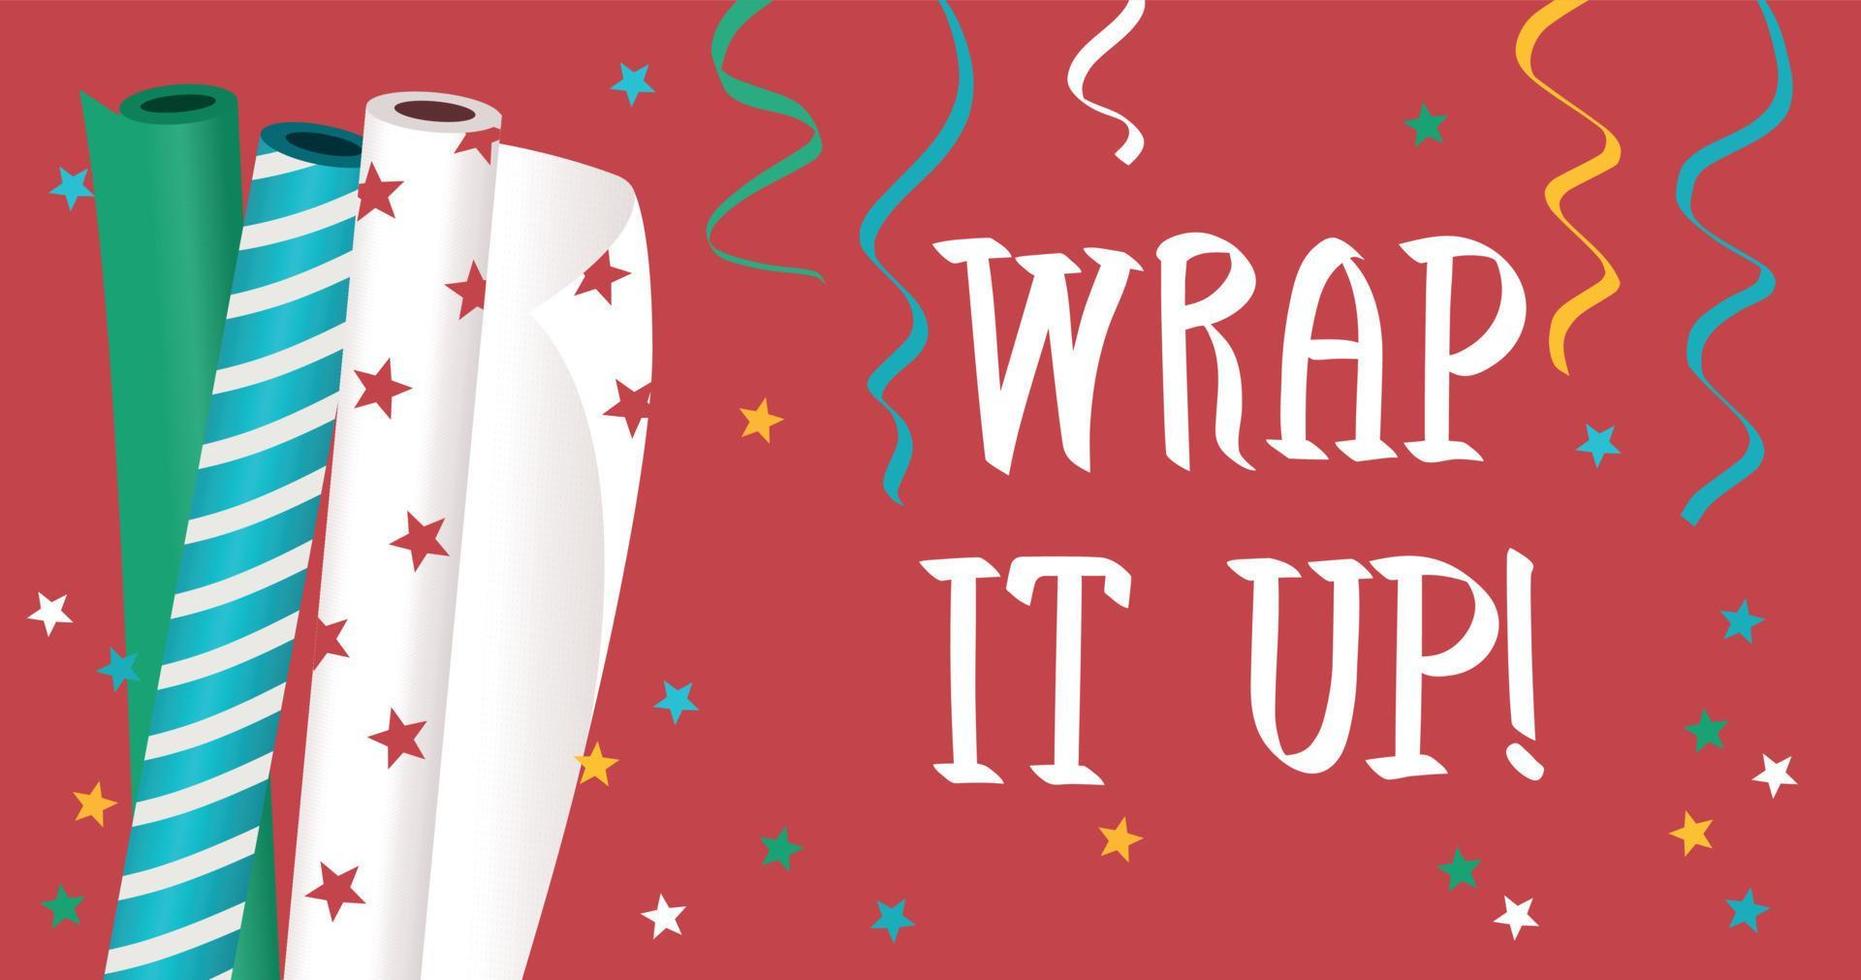 Promotion banner for advertising with wrapping christmas paper, ribbons, stars and lettering wrap it up. Red christmas and new year background. vector